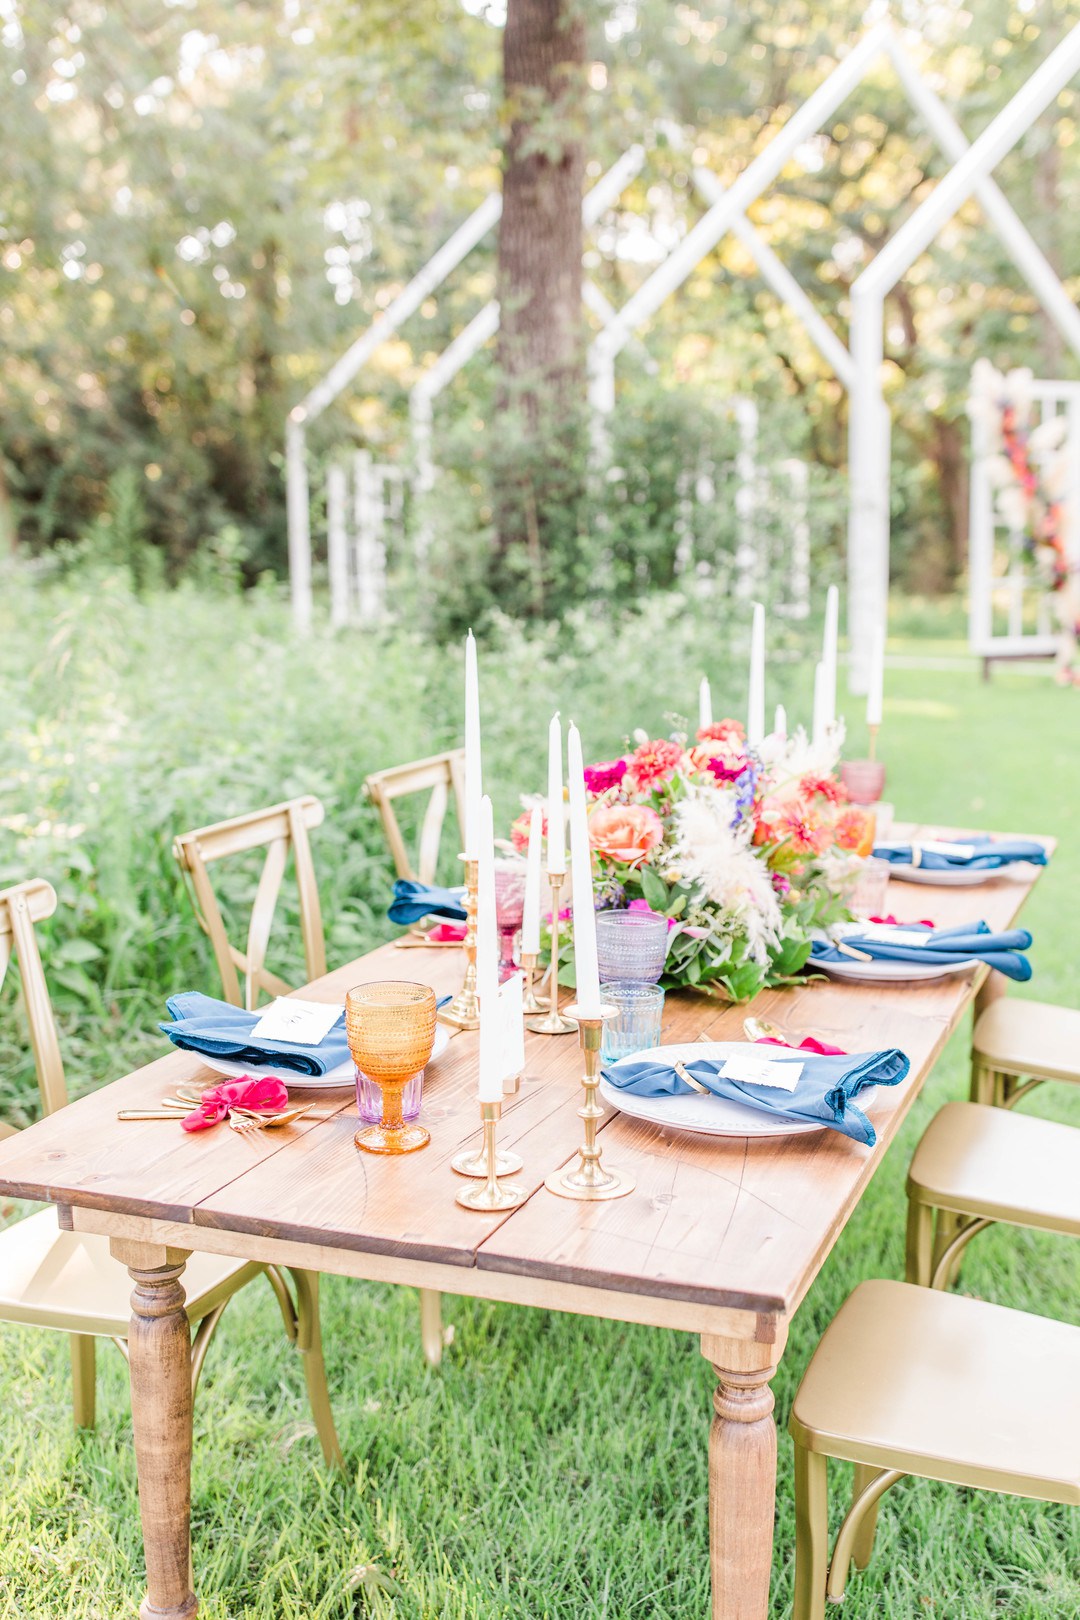 The wedding tablescape was done with blue napkins, pink bows, gilded touches and colored glasses plus lush florals